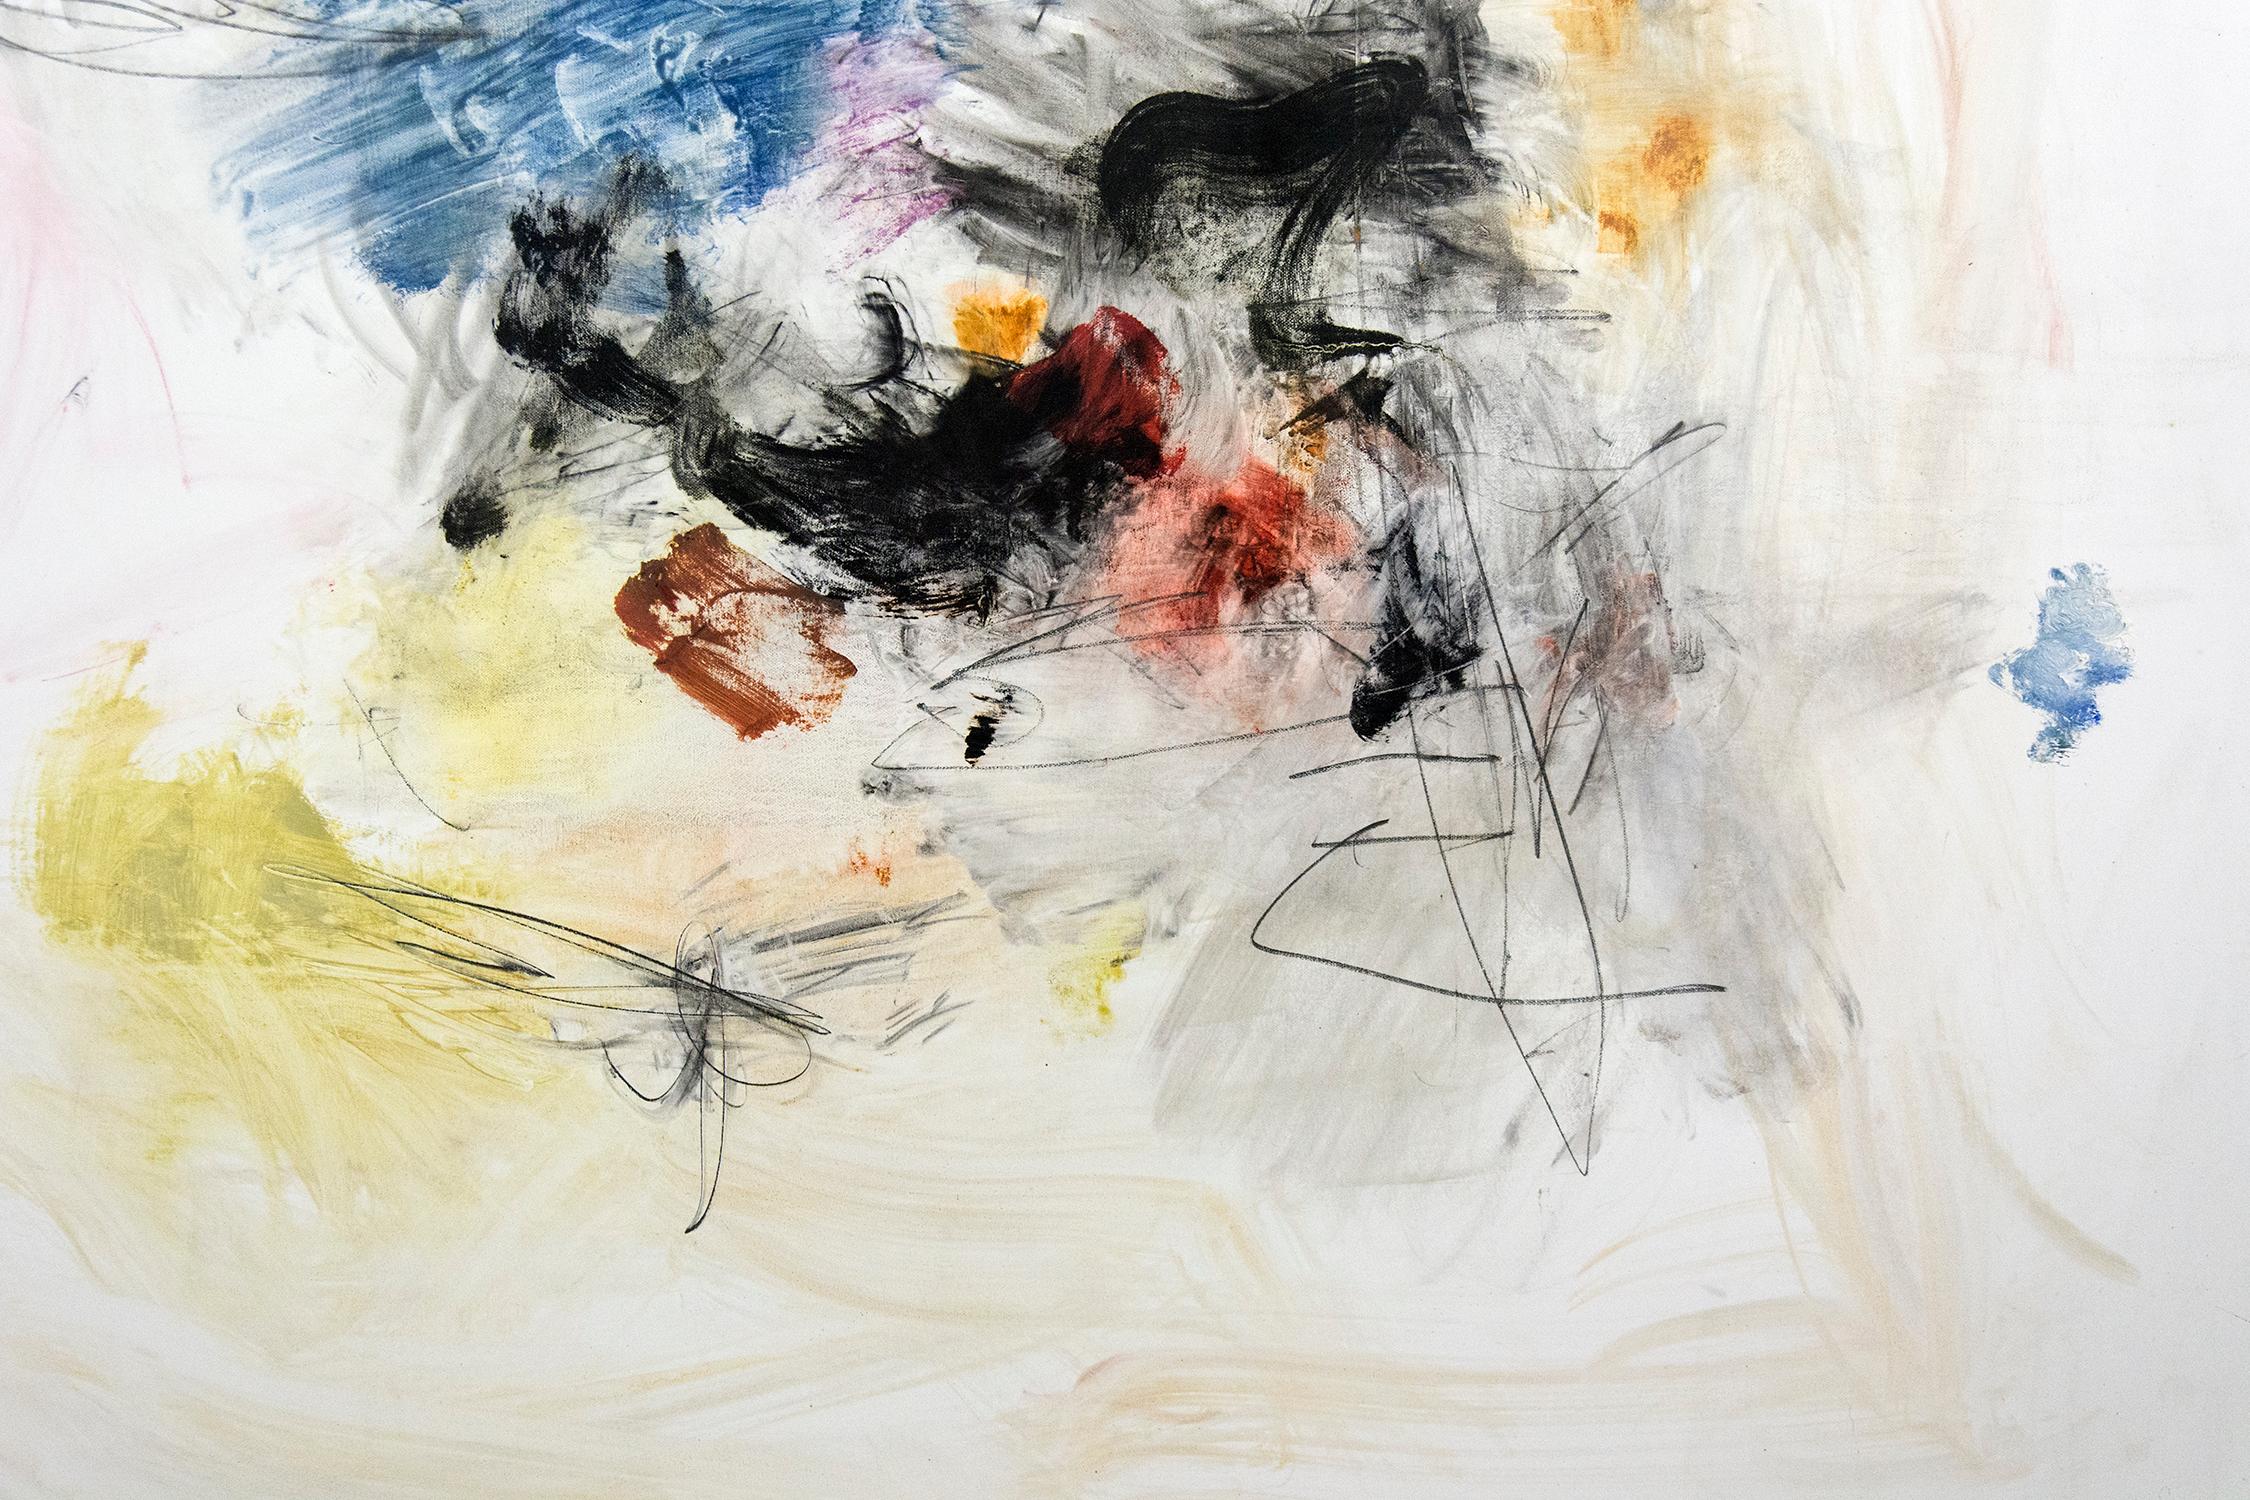 Ouvert No 78 - large, soft, white, blue, yellow, gestural abstract oil on canvas - Contemporary Painting by Scott Pattinson